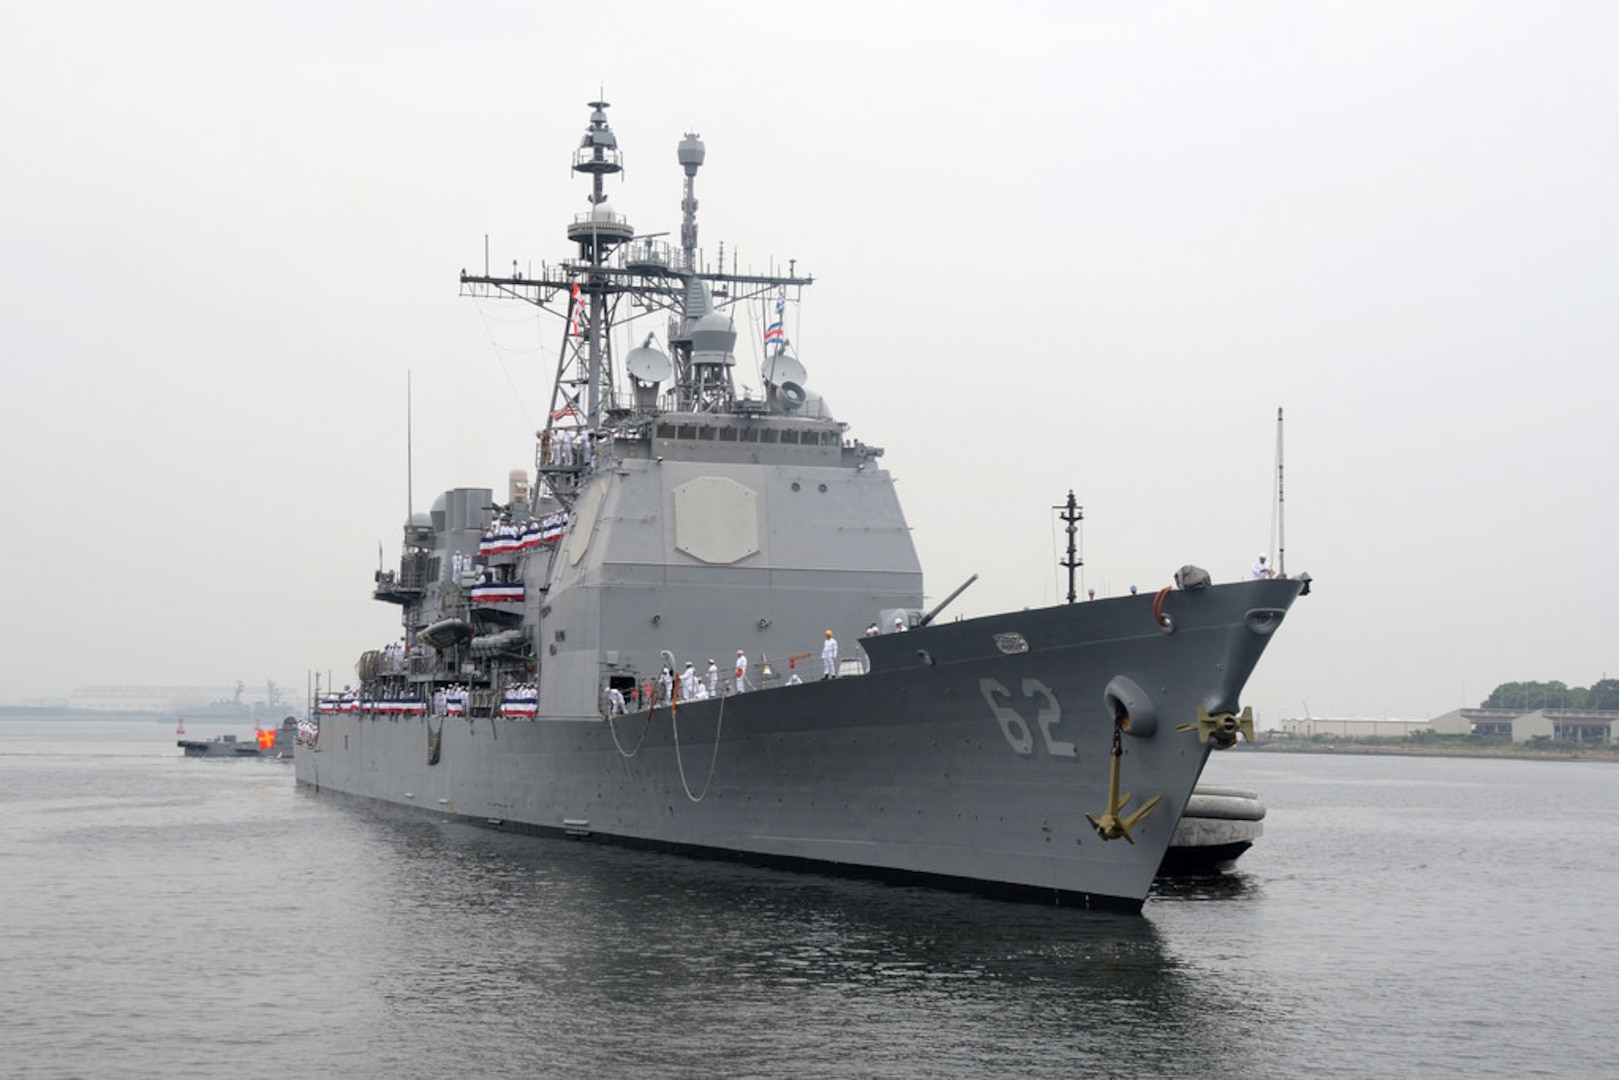 YOKOSUKA, Japan (June 18, 2015) - The Ticonderoga-class guided-missile cruiser USS Chancellorsville (CG 62) arrives at Commander Fleet Activities Yokosuka to join the Forward-Deployed Naval Forces deployed to Japan. Chancellorsville recently completed a combat systems update with the latest Aegis Baseline 9 combat system. Chancellorsville is the first U.S. Navy ship to forward-deploy with that capability to help ensure the U.S. is best positioned to provide security and stability in the Indo-Asia-Pacific Region. 